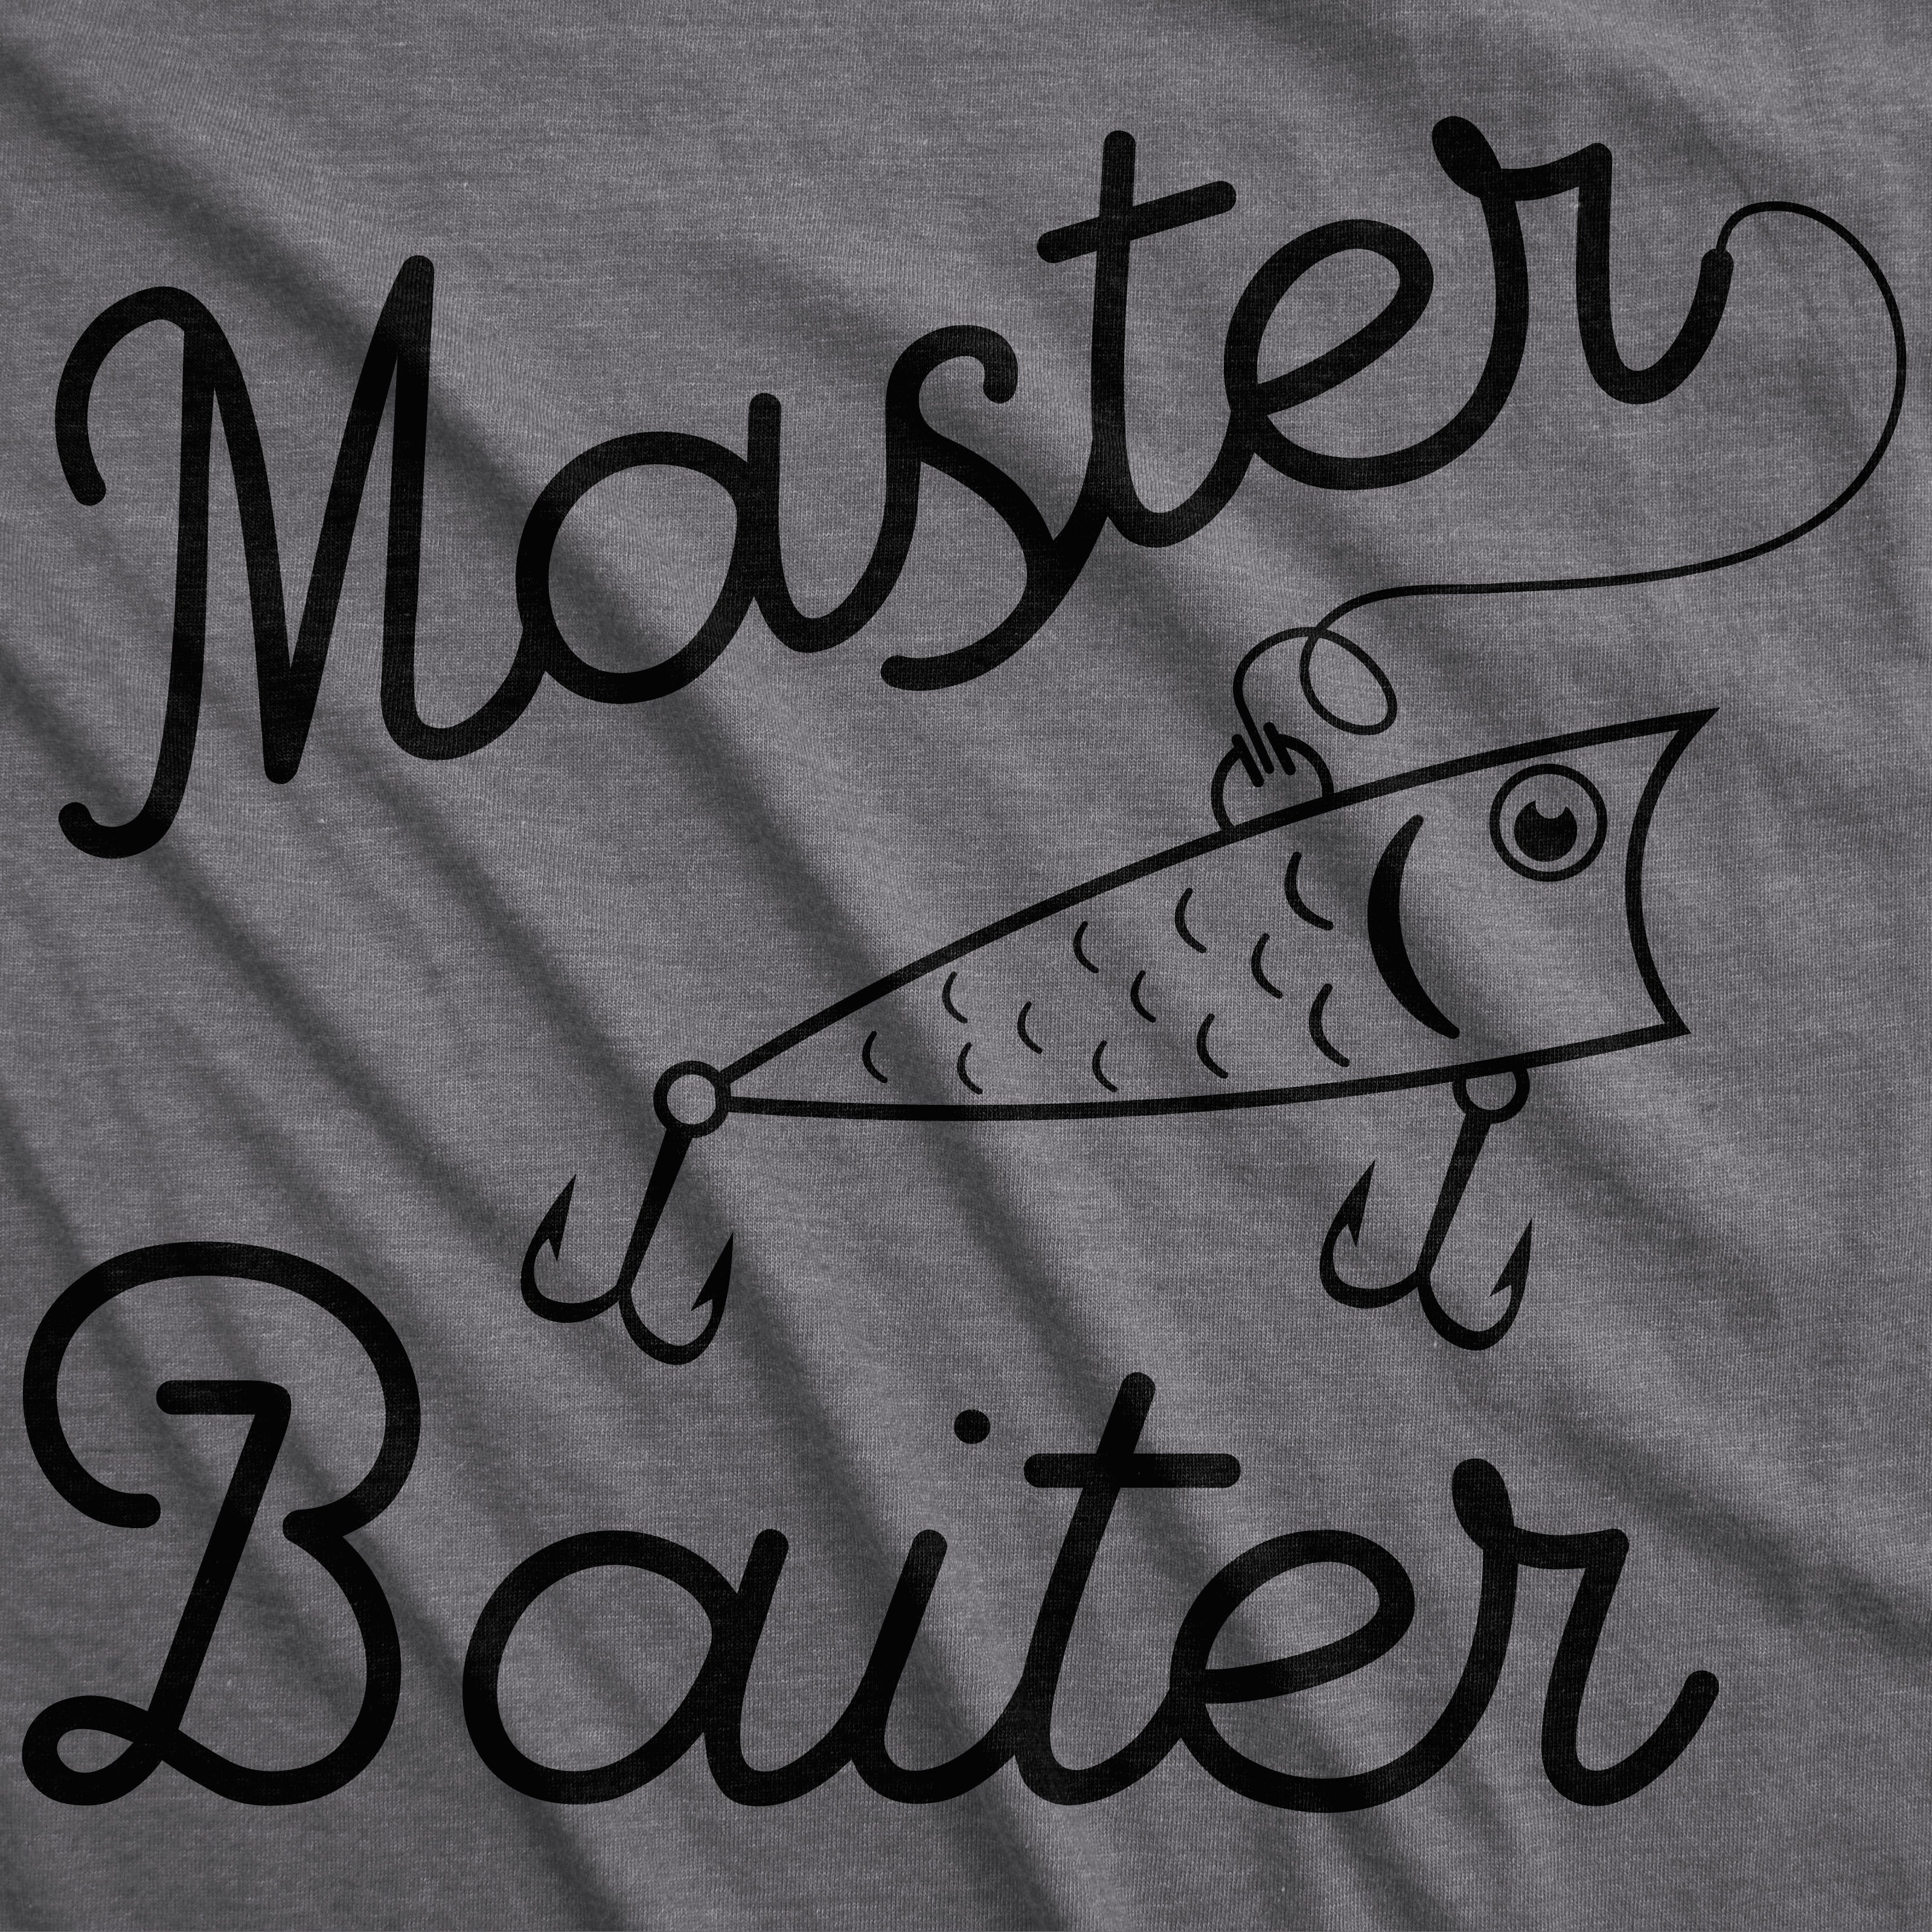 Master Baiters T-Shirts for Sale